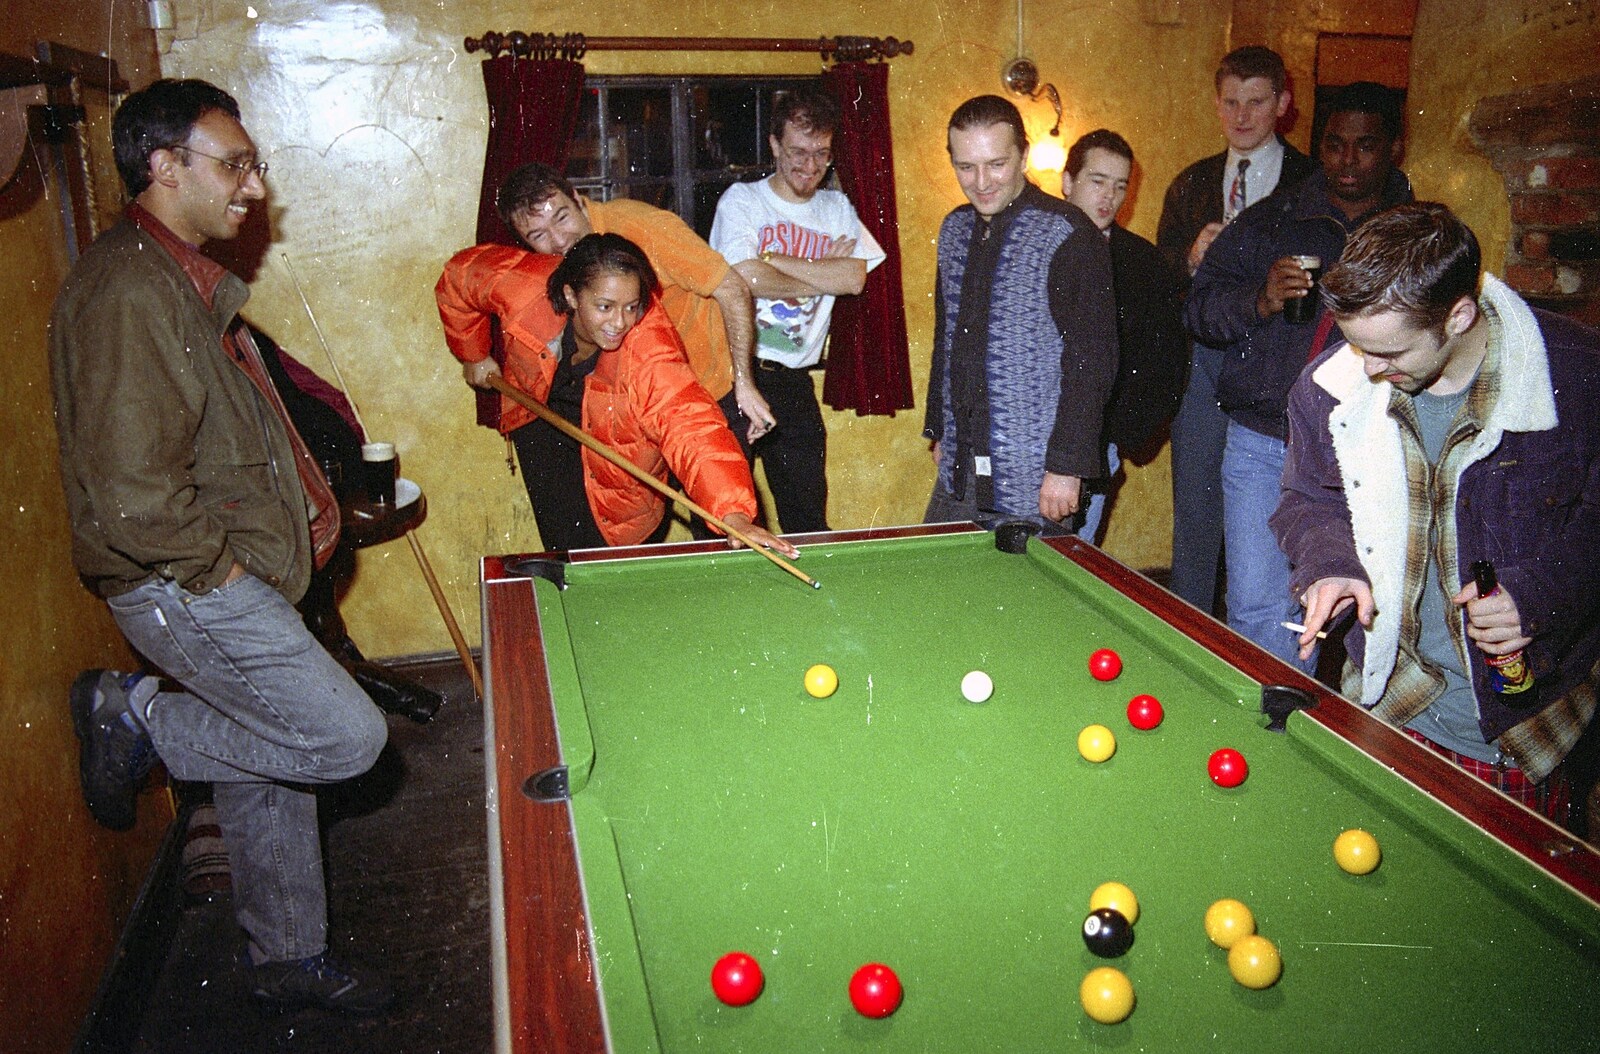 Natalie plays a shot, somewhat restricted by her massive orange Puffa jacket from A Conkers Night and CISU in the Eagle, Brome and Ipswich, Suffolk - 14th September 1996